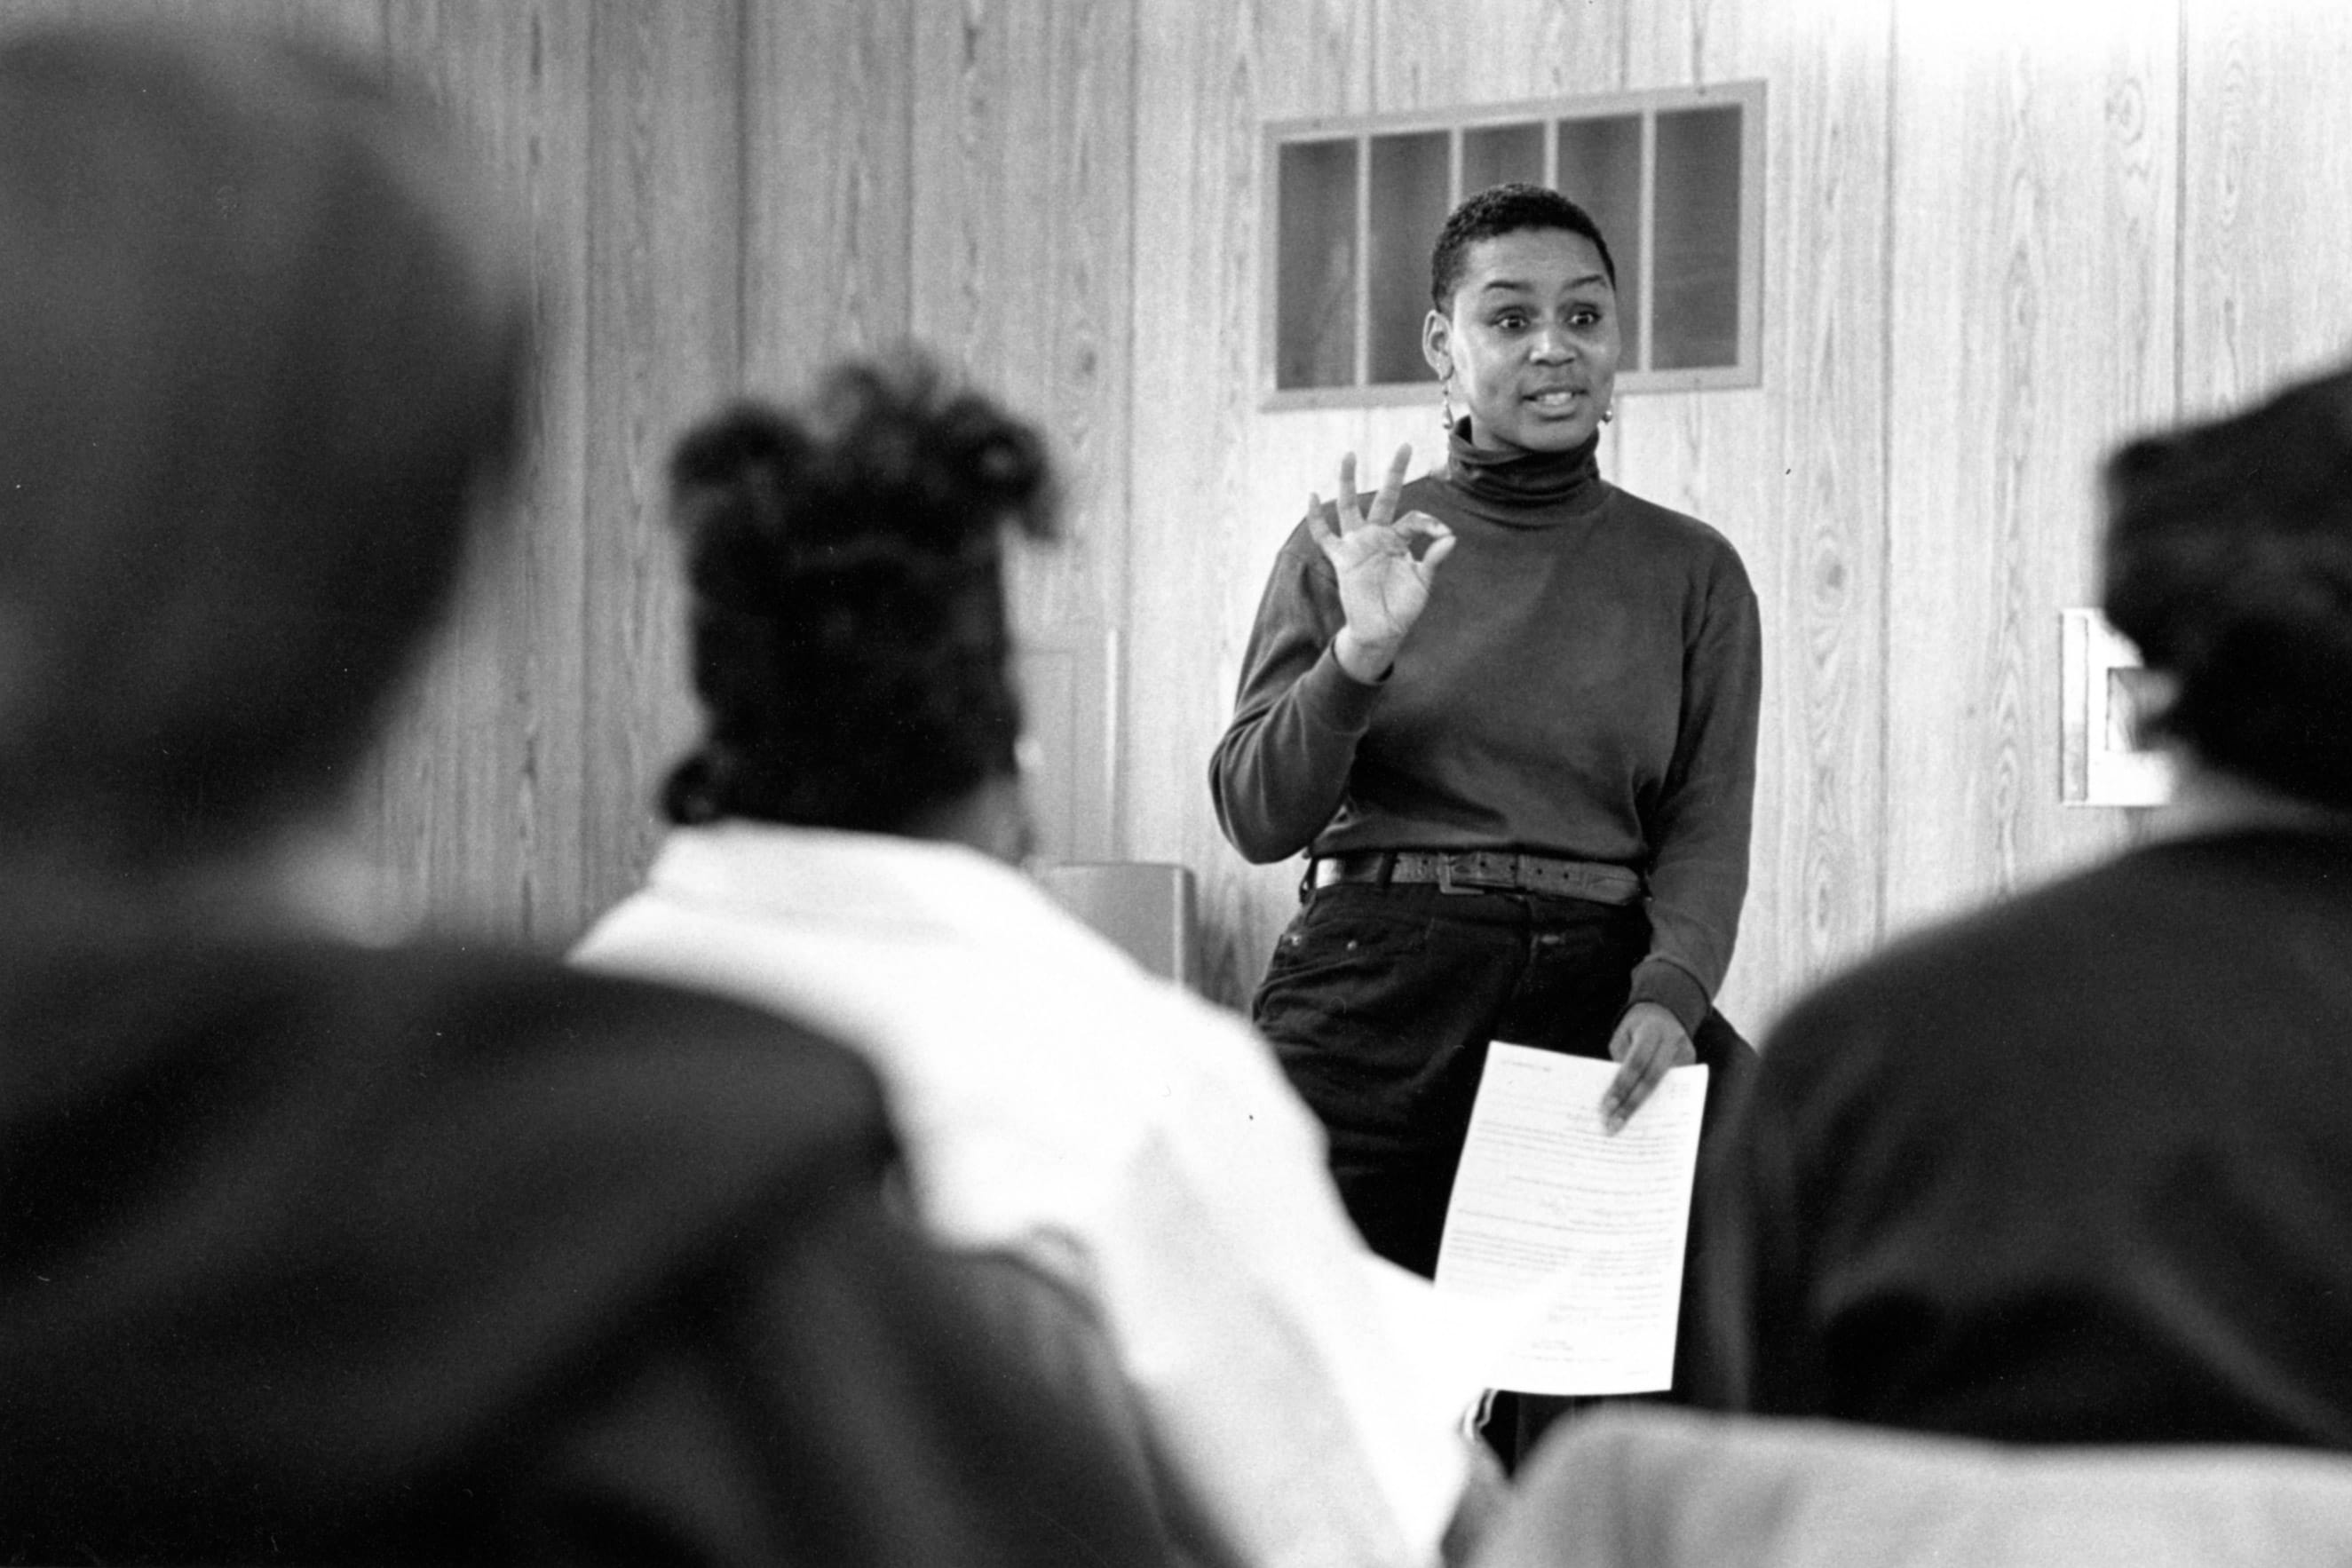 A black and white photo of a Black person speaking in front of an audience.